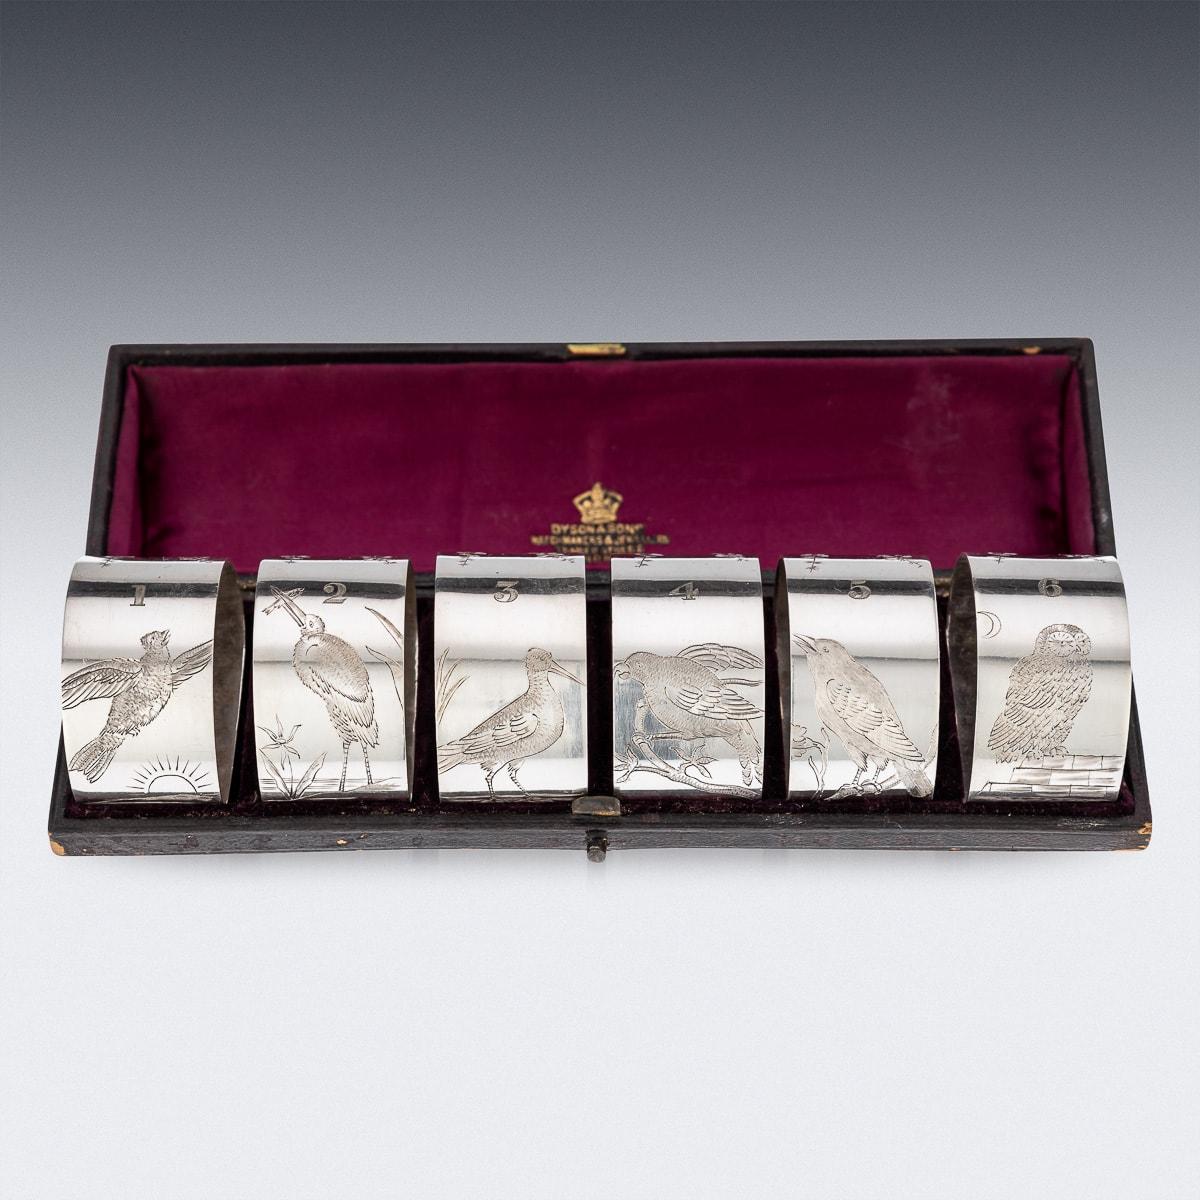  Antique 19th Century Victorian stunning set of six silver plated napkin holders and butt markers. Each napkin holder is engraved with highly-decorative flowers and birds in the oriental Japanise inspired style. The set comes in an original leather